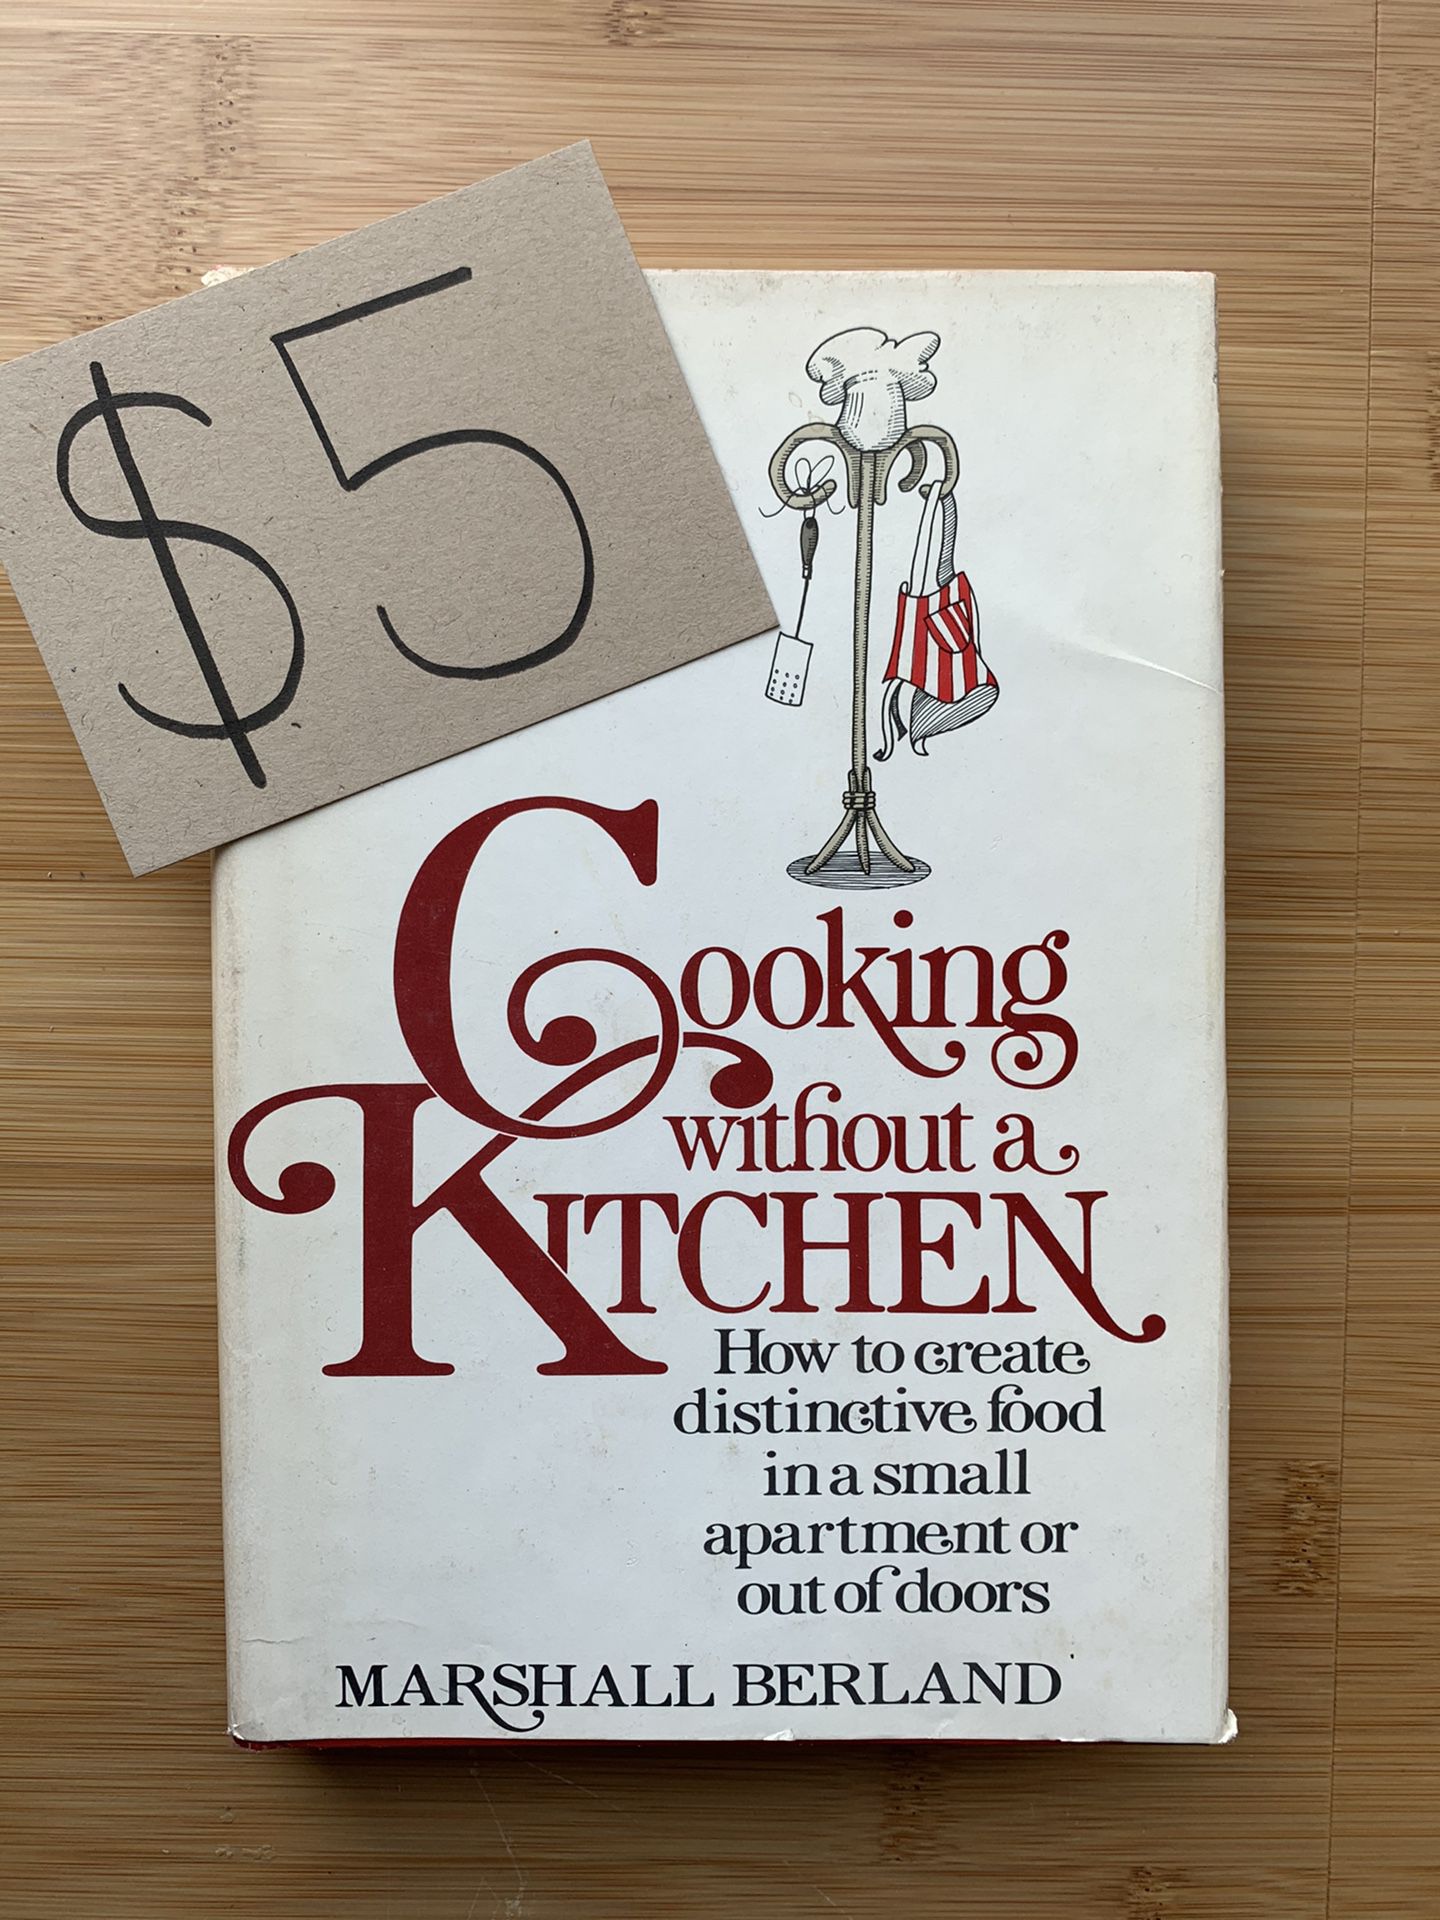 Cooking without a Kitchen by Marshall Berland (vintage cookbook)